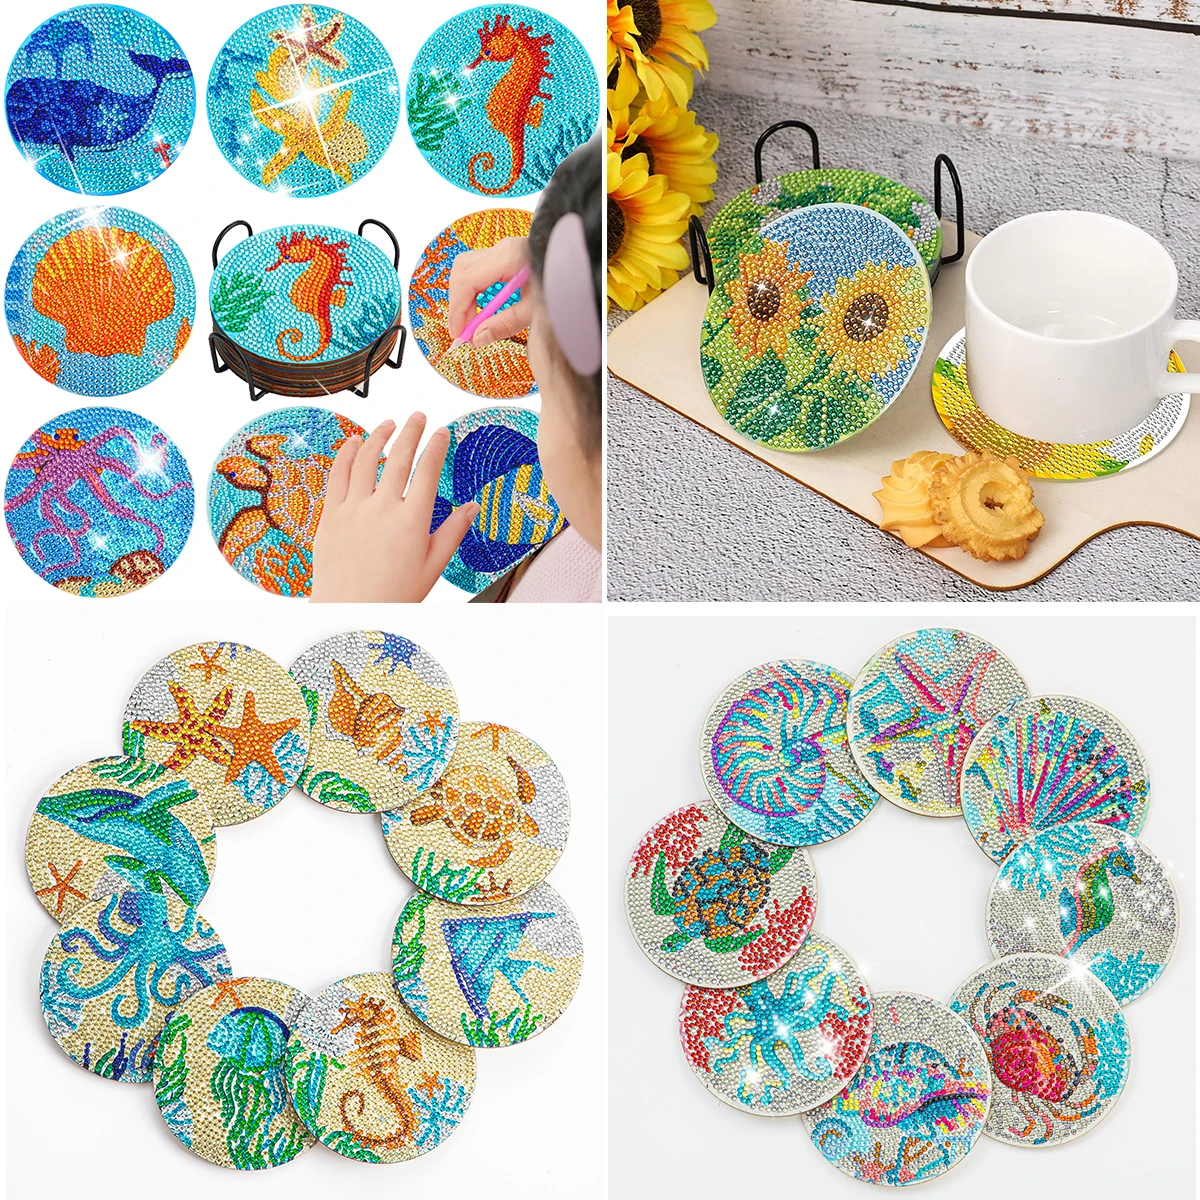 

8PCS Diamond Painting Coaster Set Ocean Series Rhinestones Embroidery Coaster Wooden Table Placemat with Rack for Home Decor